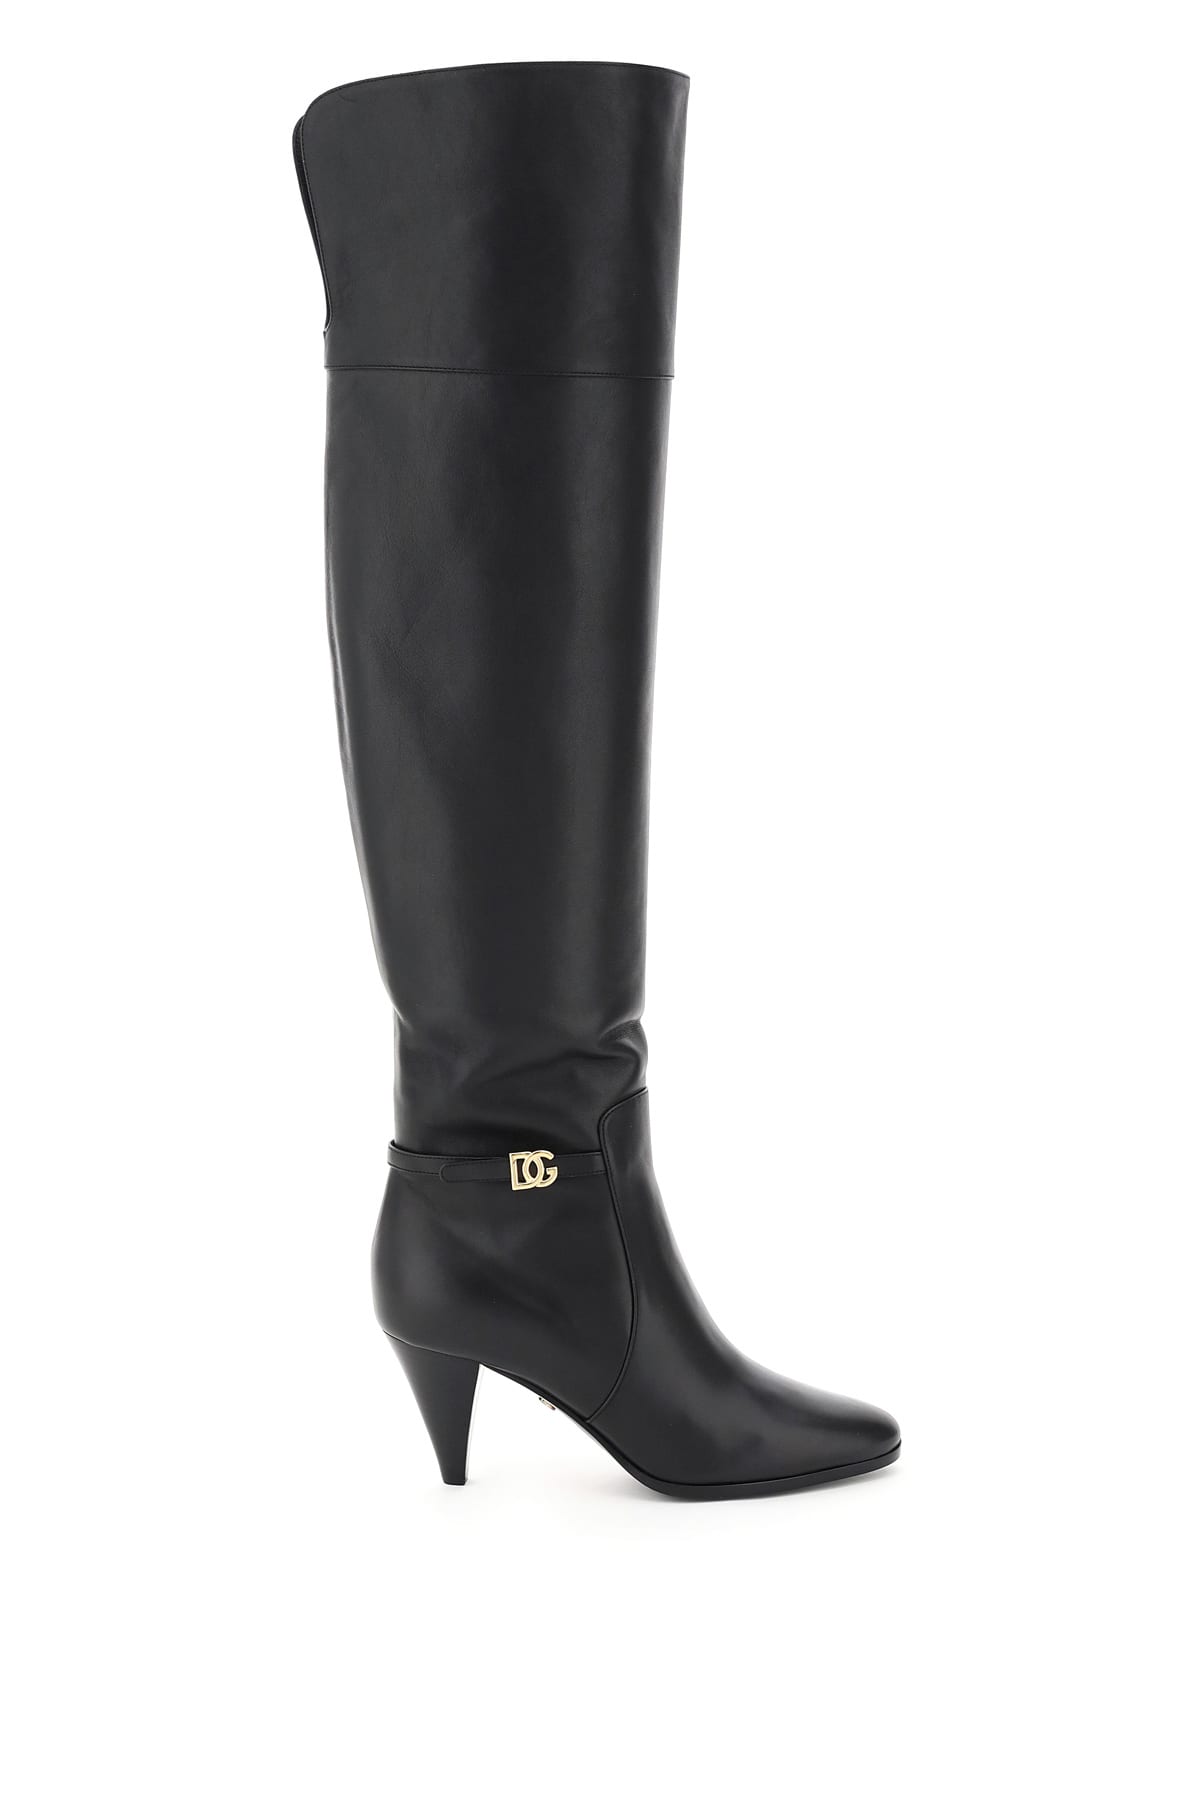 Buy Dolce & Gabbana Caroline Leather Boots online, shop Dolce & Gabbana shoes with free shipping